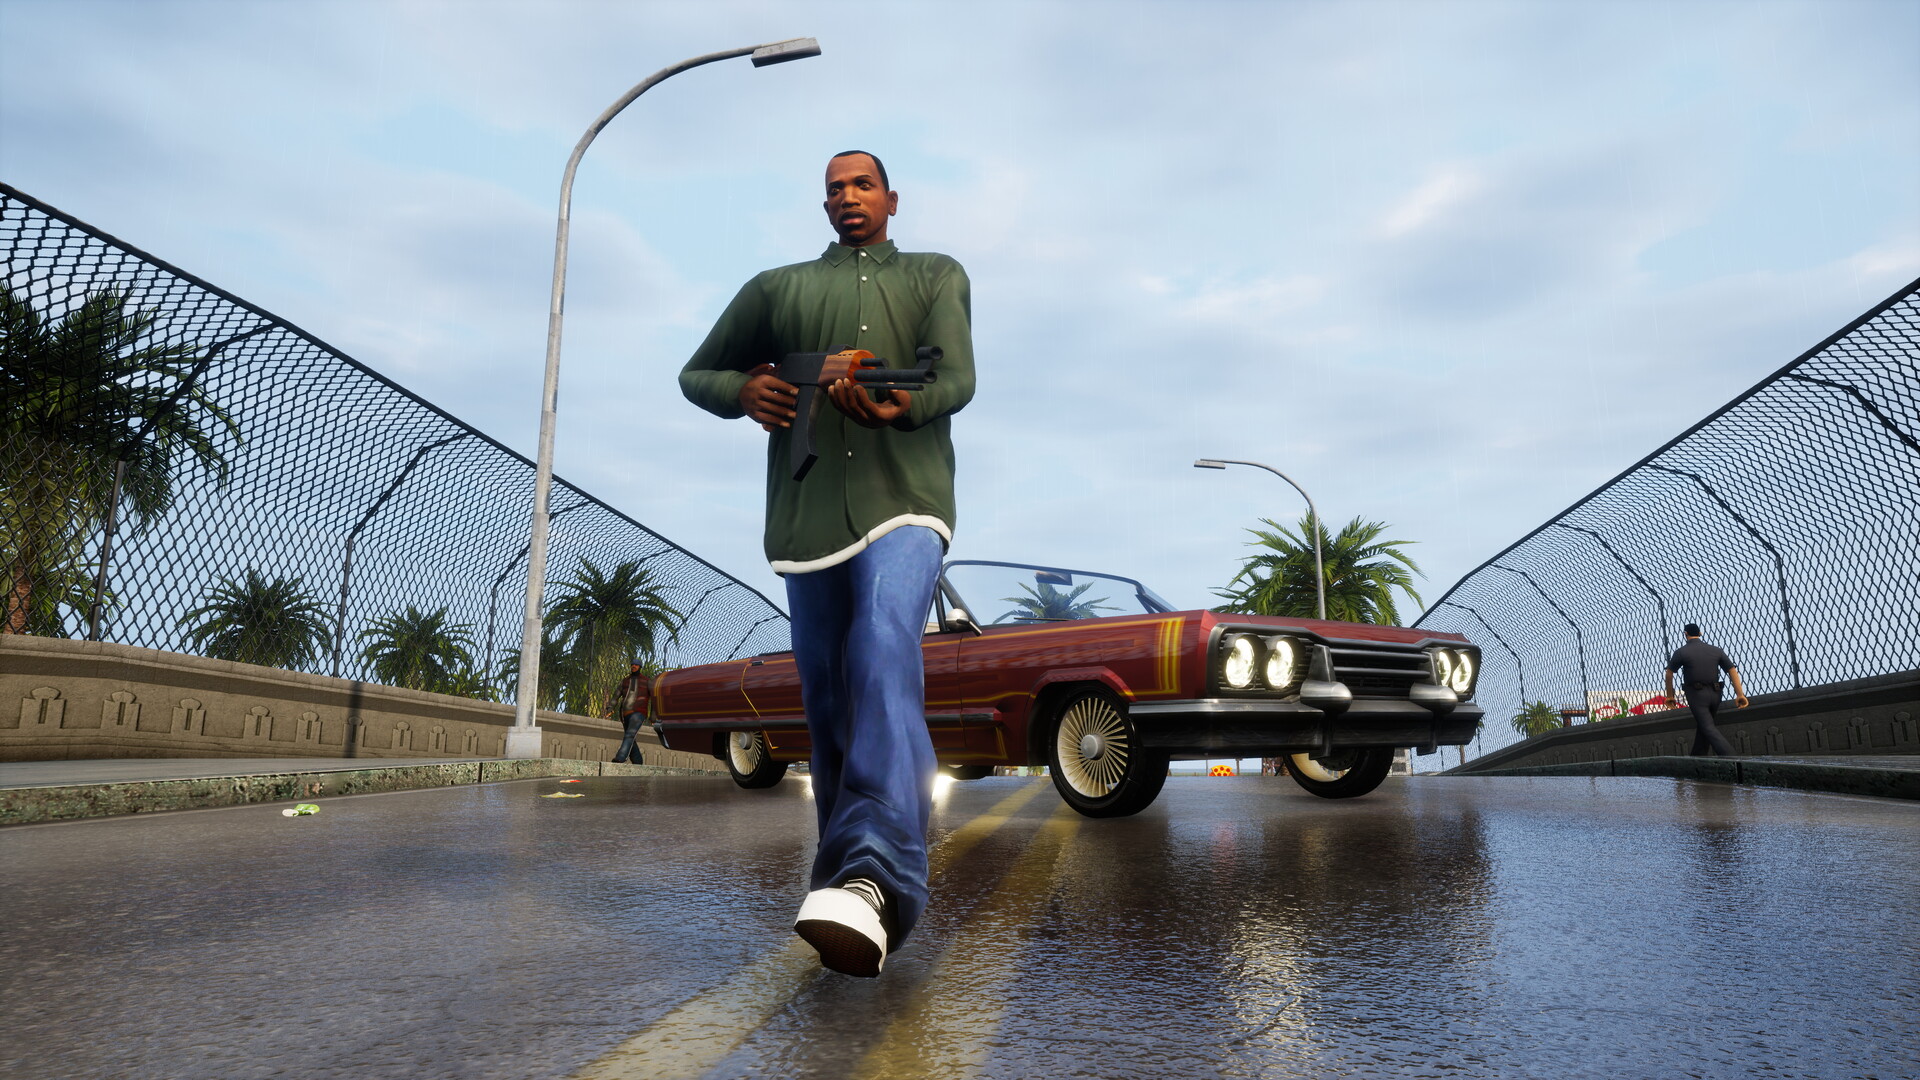 Grand Theft Auto: San Andreas – The Definitive Edition Featured Screenshot #1